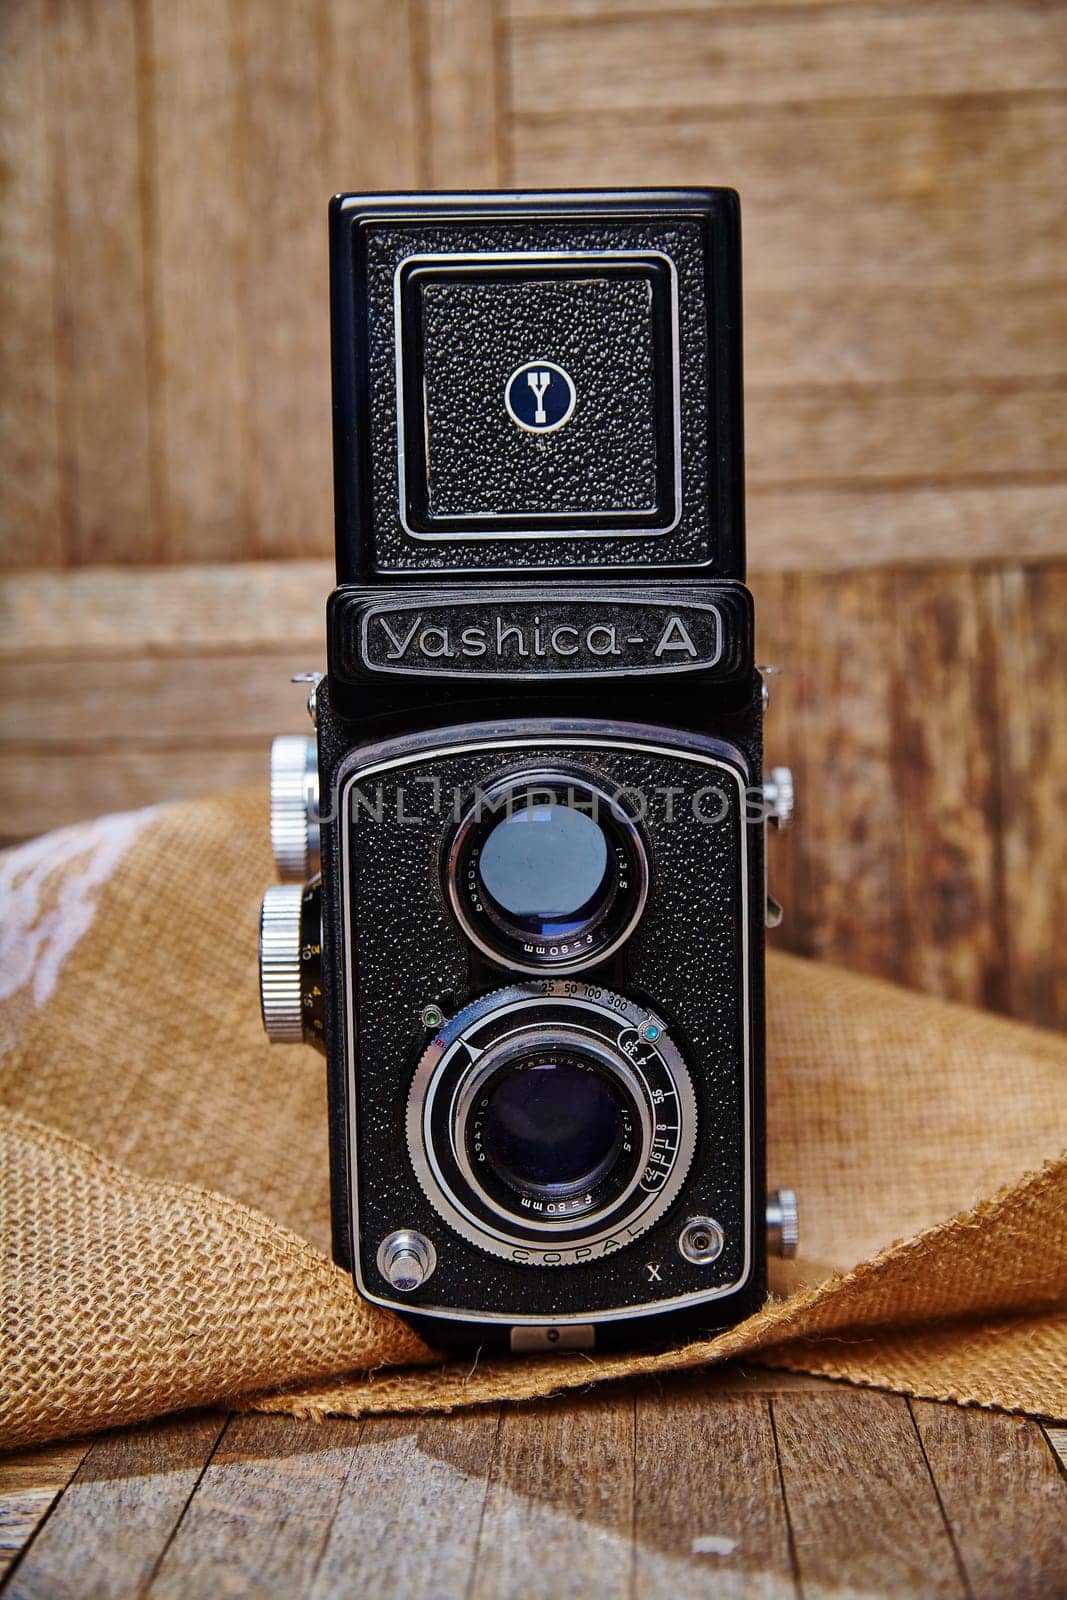 Vintage Yashica-A TLR Camera on a rustic burlap backdrop. Nostalgic charm meets intricate mechanics of this classic film camera.